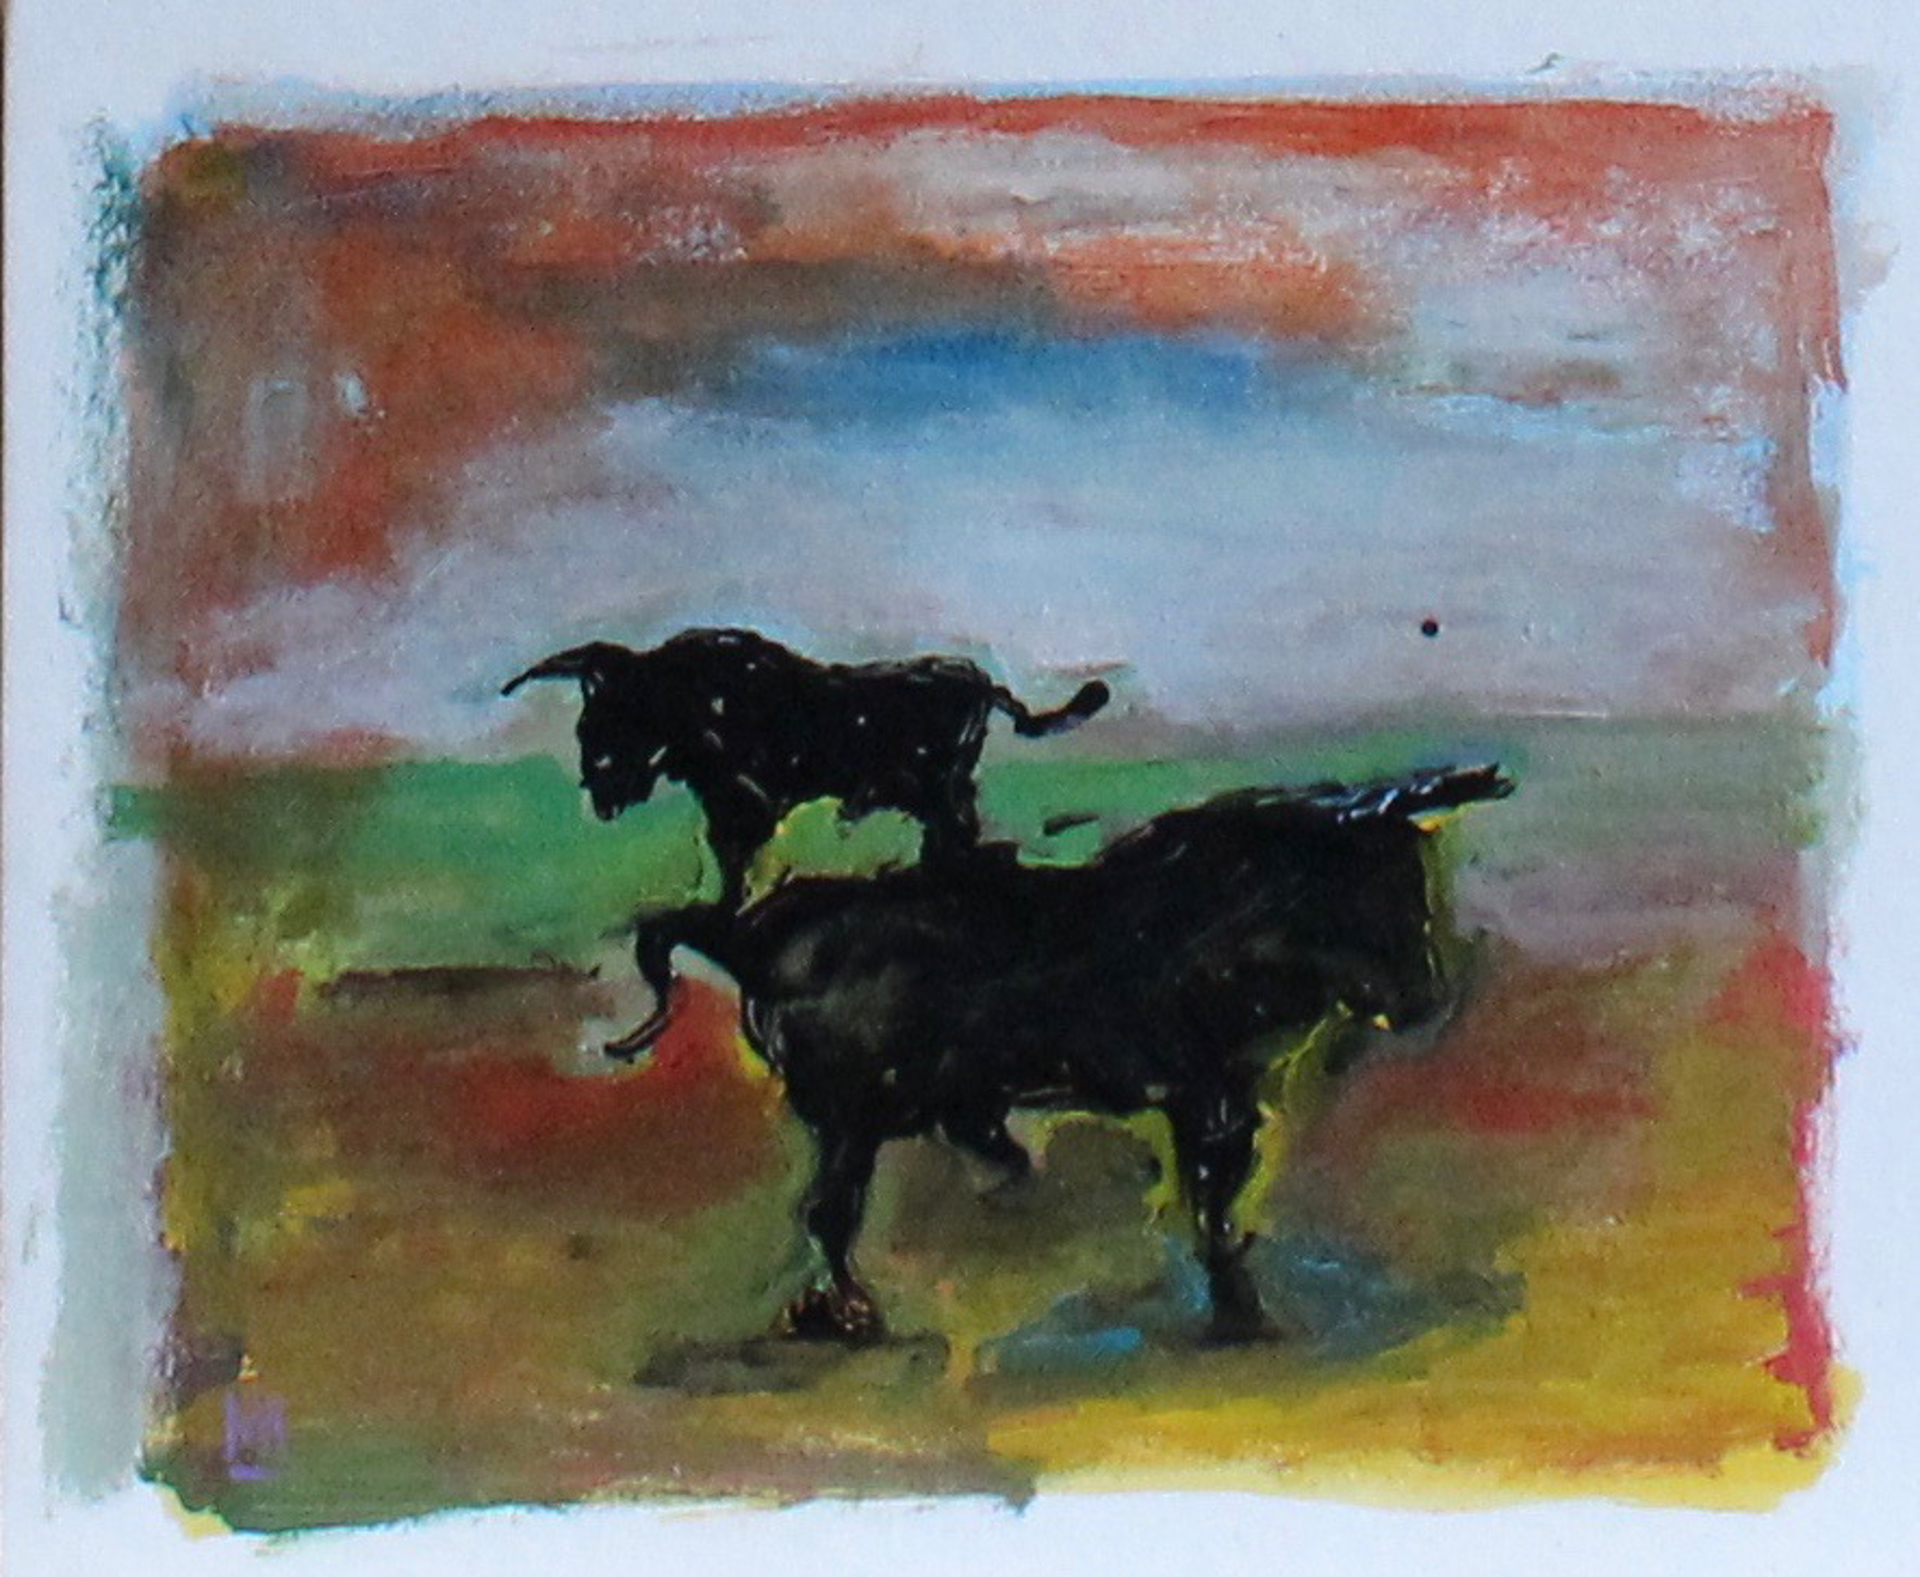 Two Bulls in a Field by Michael Snodgrass